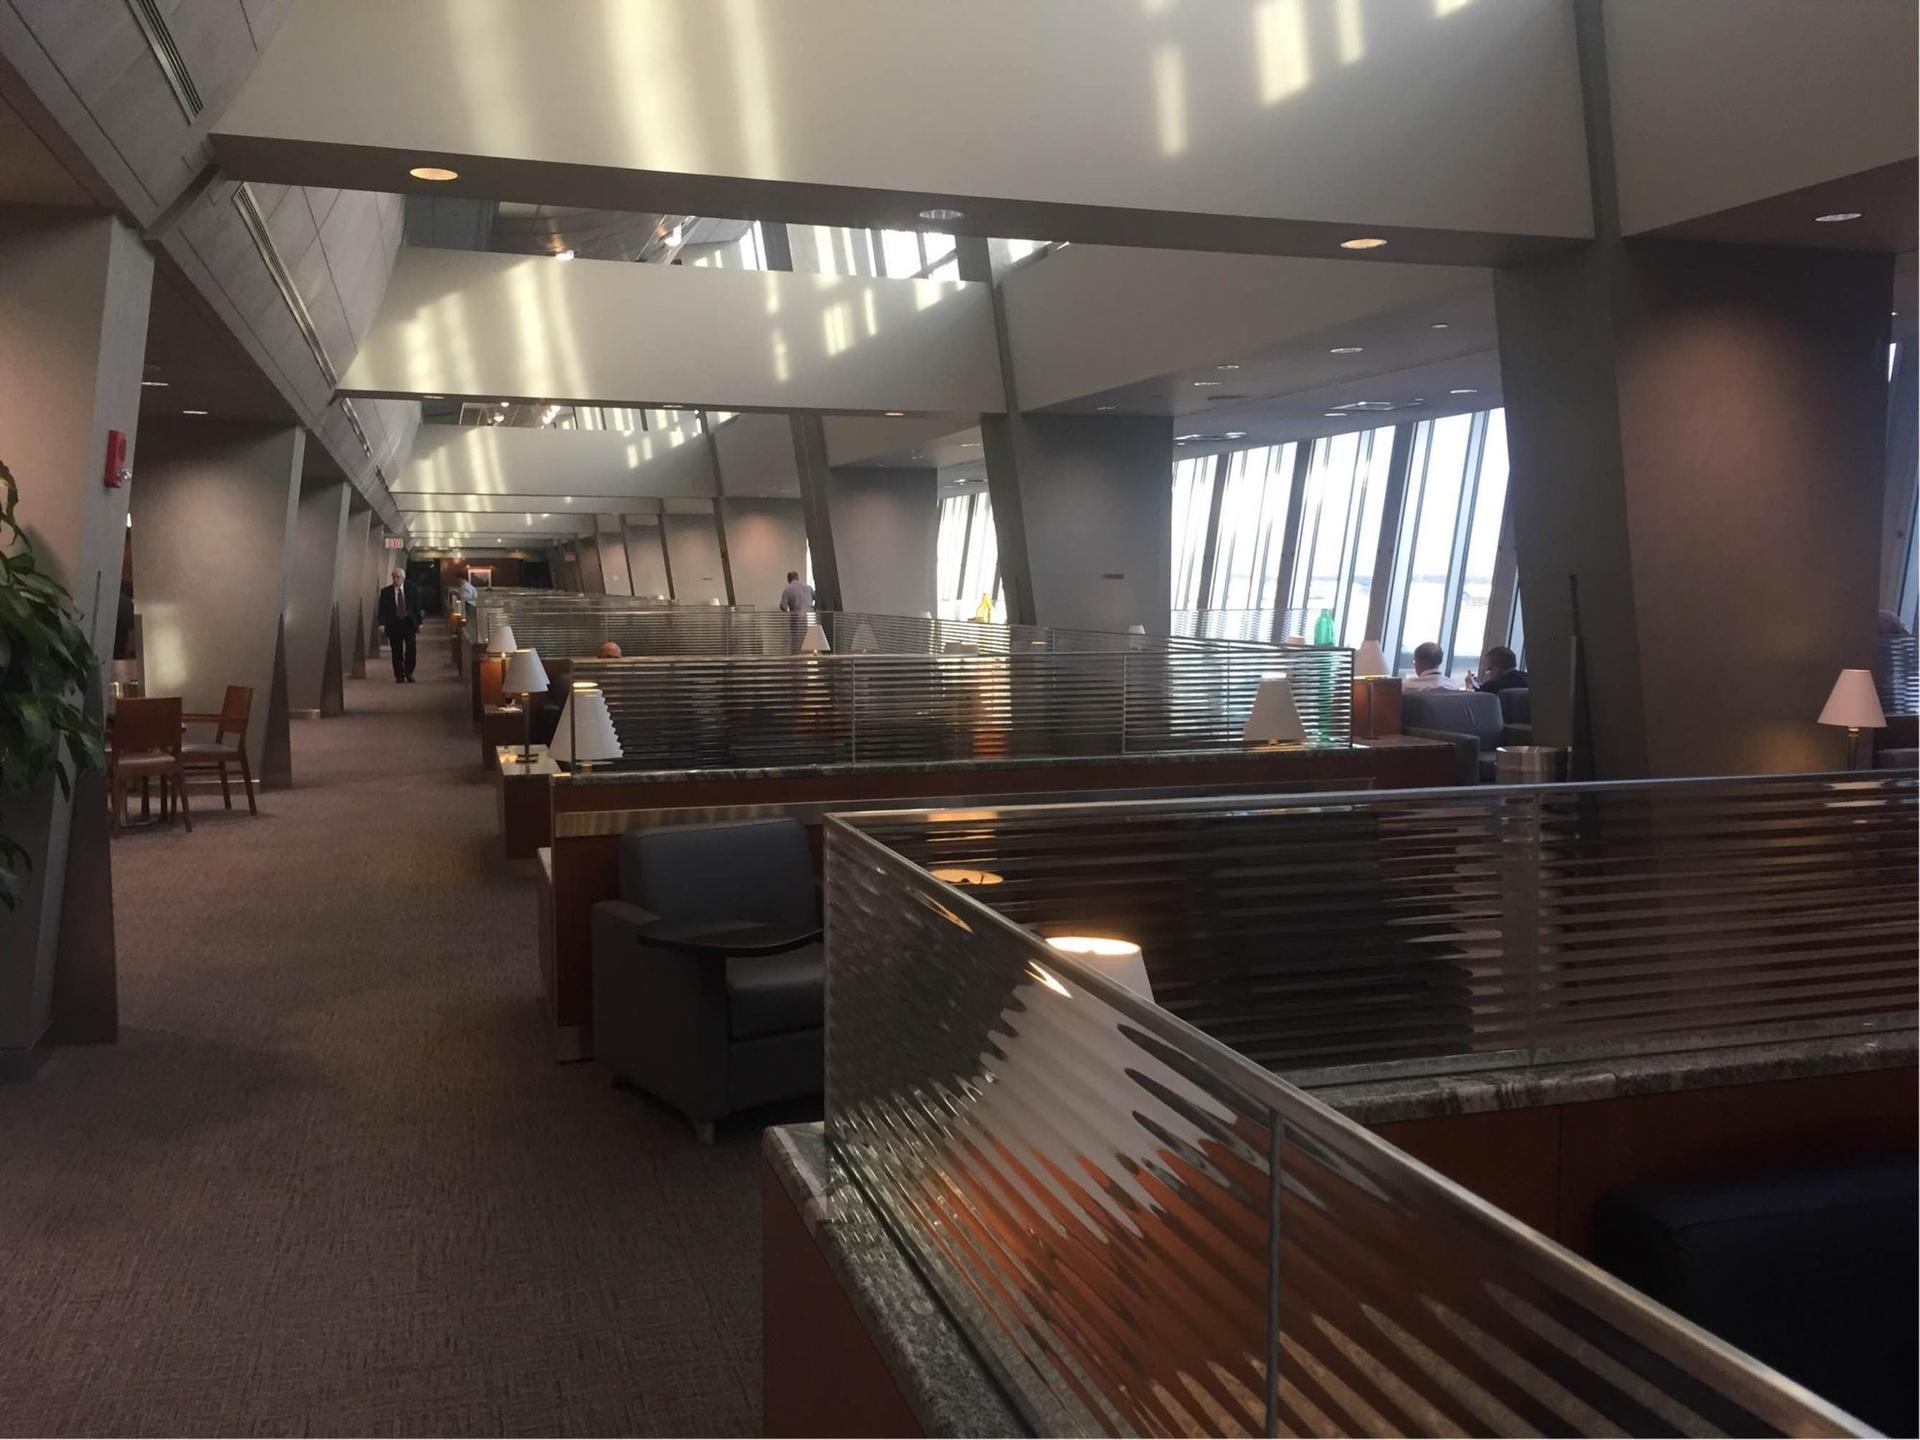 American Airlines Admirals Club image 14 of 48